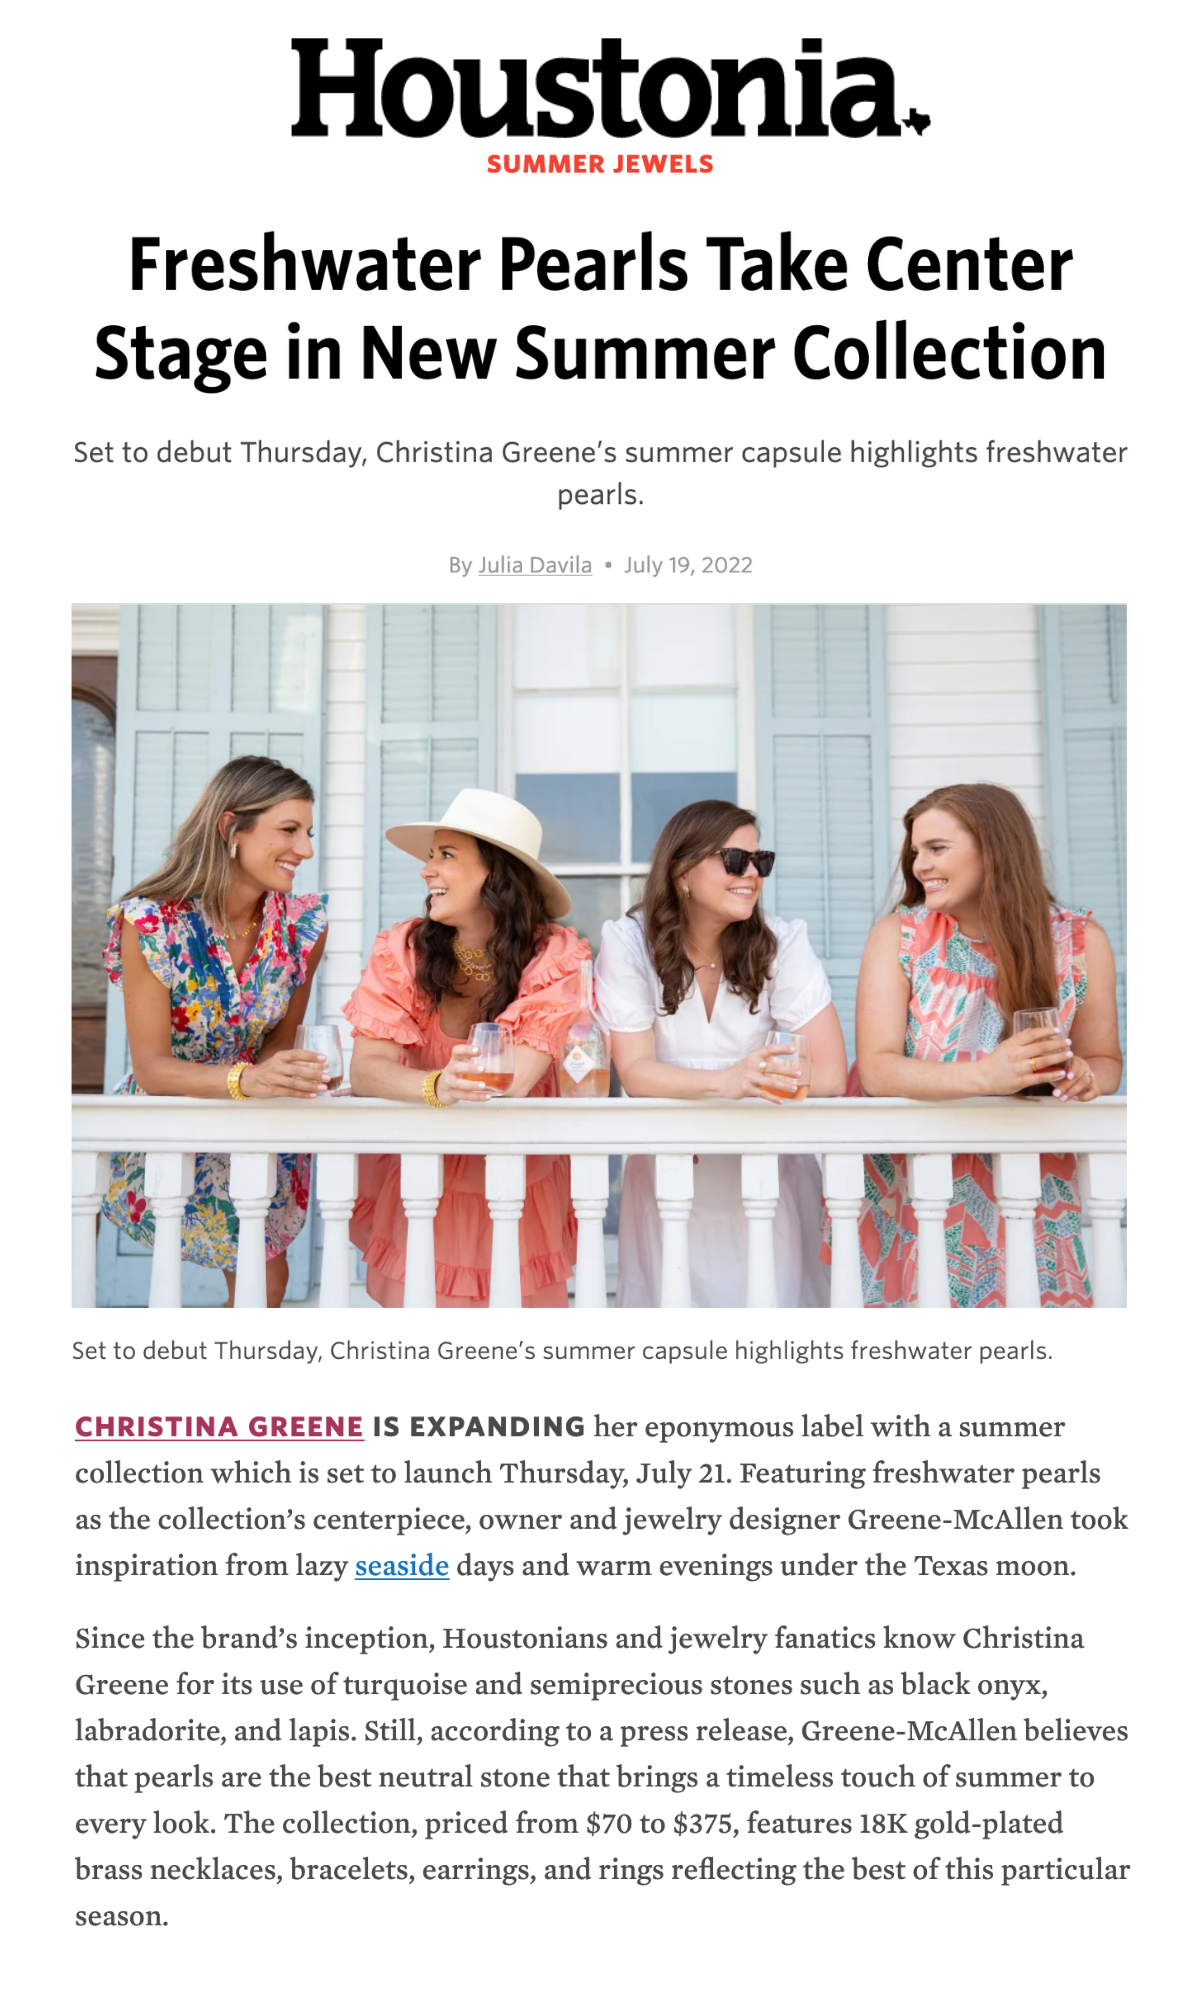 Christina Greene's Endless Summer Collection Article from the Houstonia features a photo of Christina Greene-McAllen and her friends wearing earrings, necklaces, rings, and bracelets from the collection.